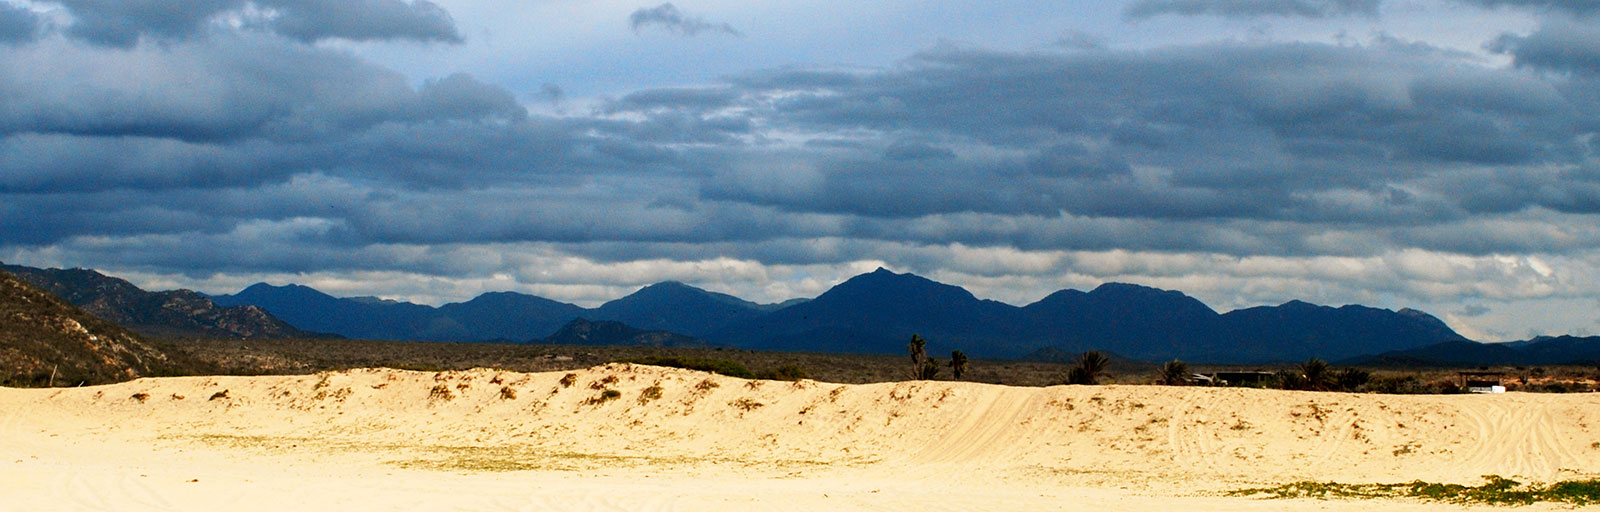 Hiking & Yoga Retreat in Mexico: Beach Dune and Mountains